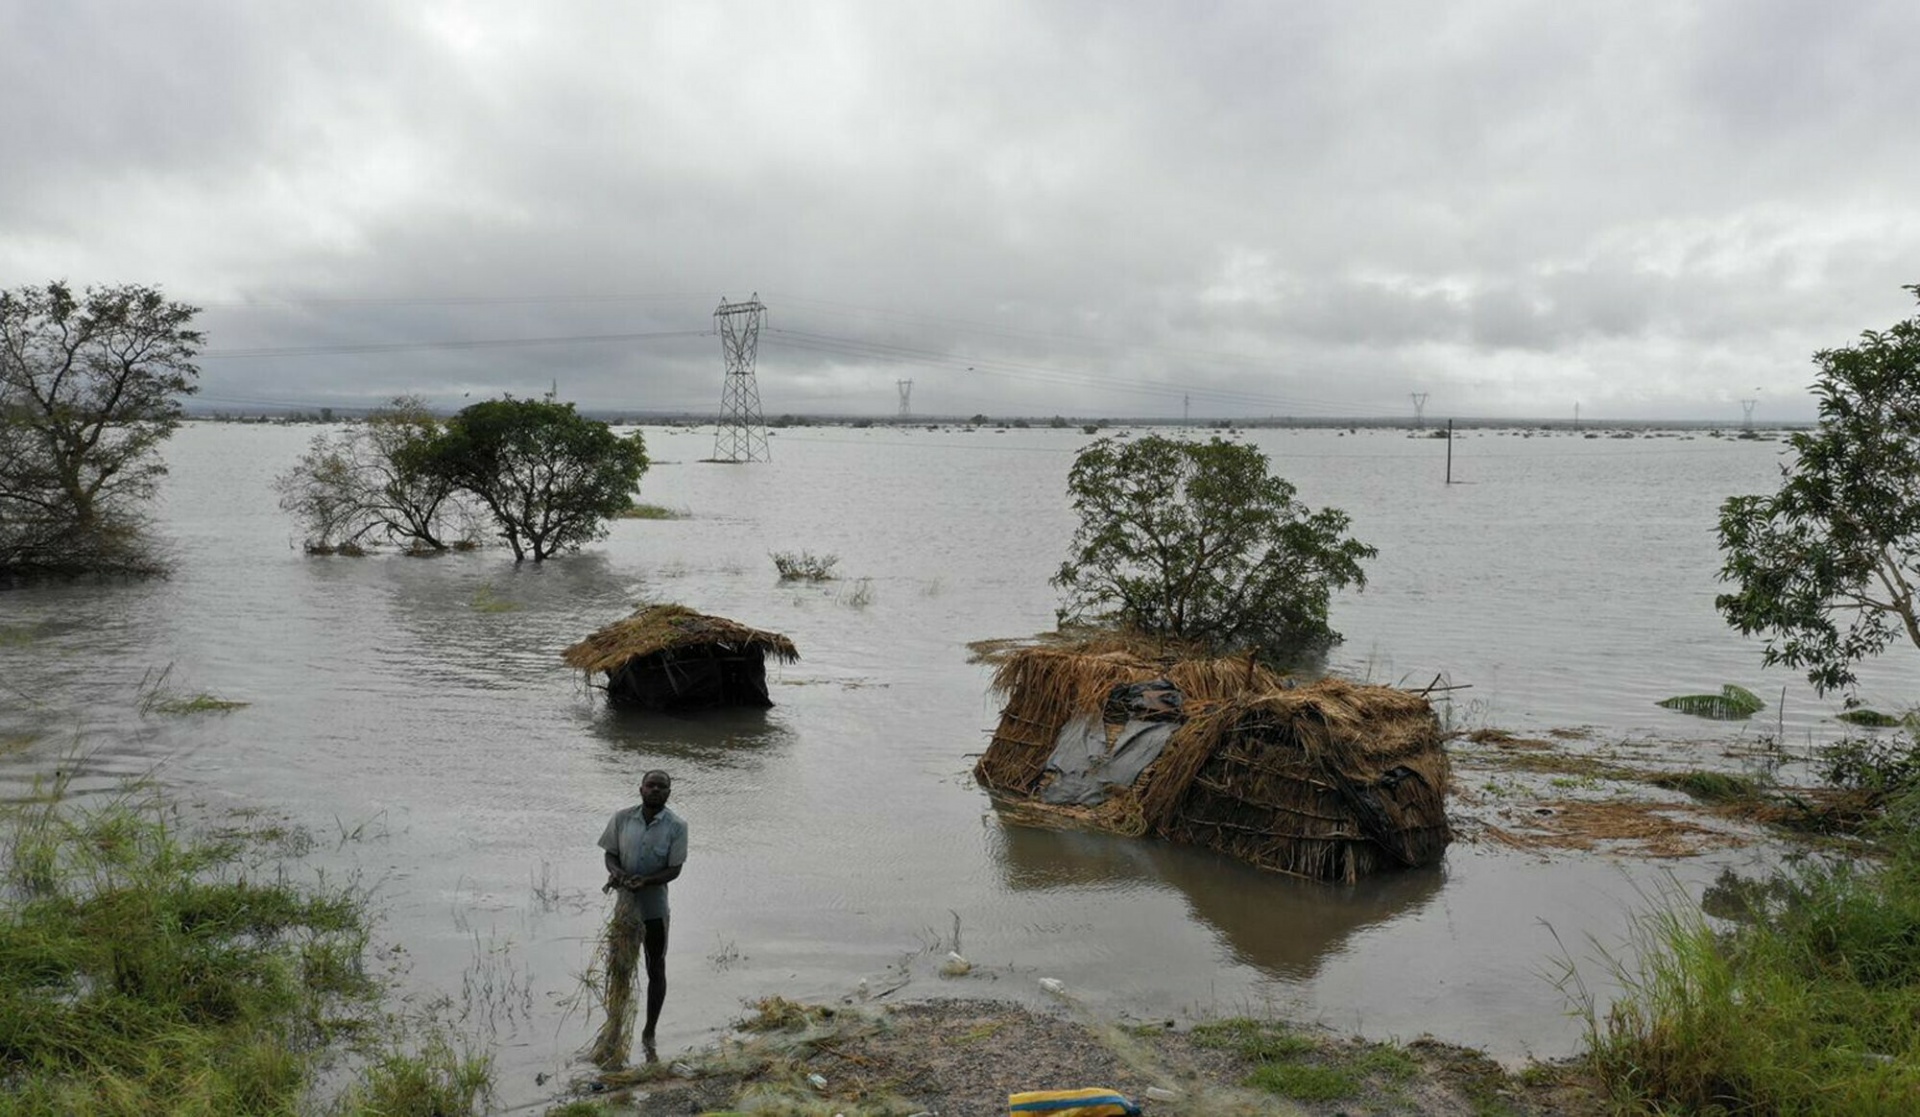 A man stands in flood waters following cyclone force winds and heavy rain near the coastal city of Beira, Mozambique, Wednesday March 20